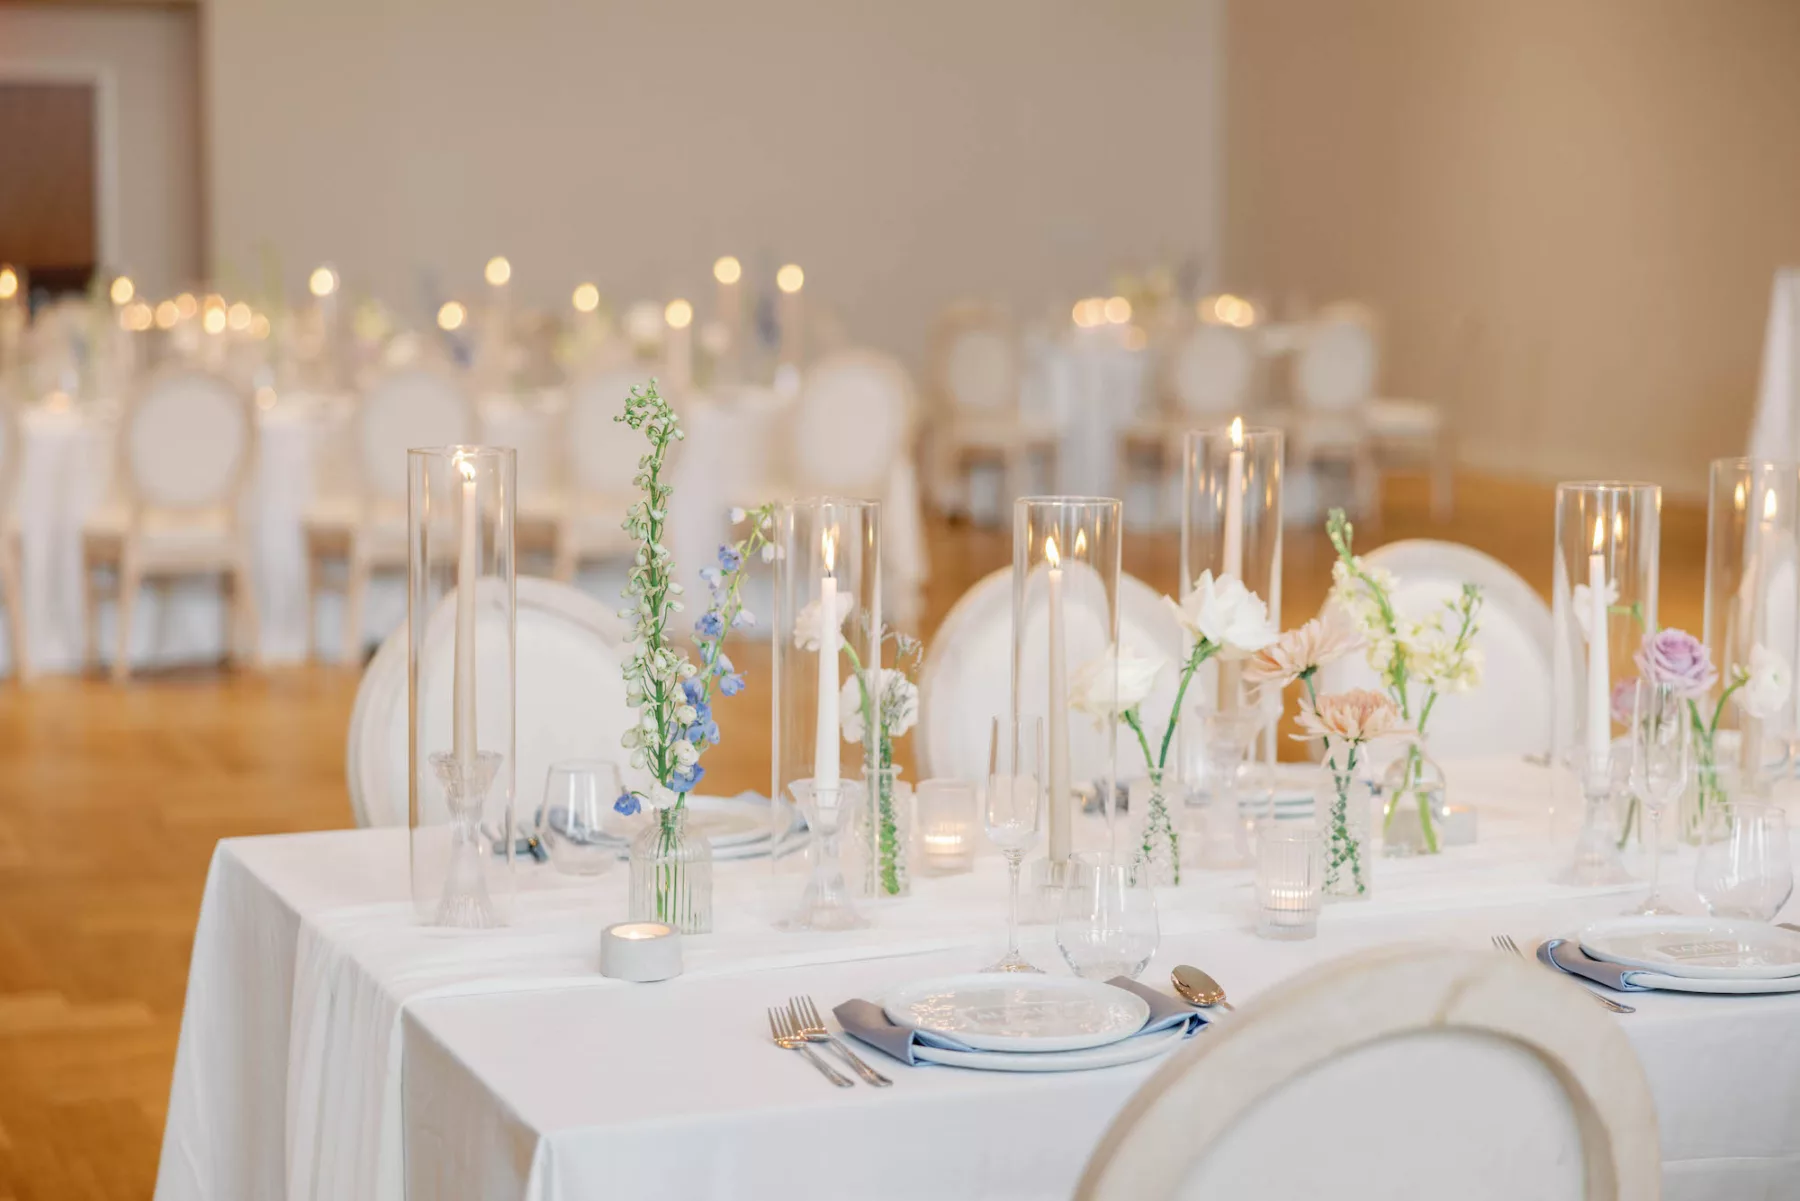 Whimsical Spring Wedding Reception Centerpiece Tablescape Decor Ideas | Blue Lily of the Valley, White Carnations, Pink Chrysanthemums, and Purple Roses in Bud Vases